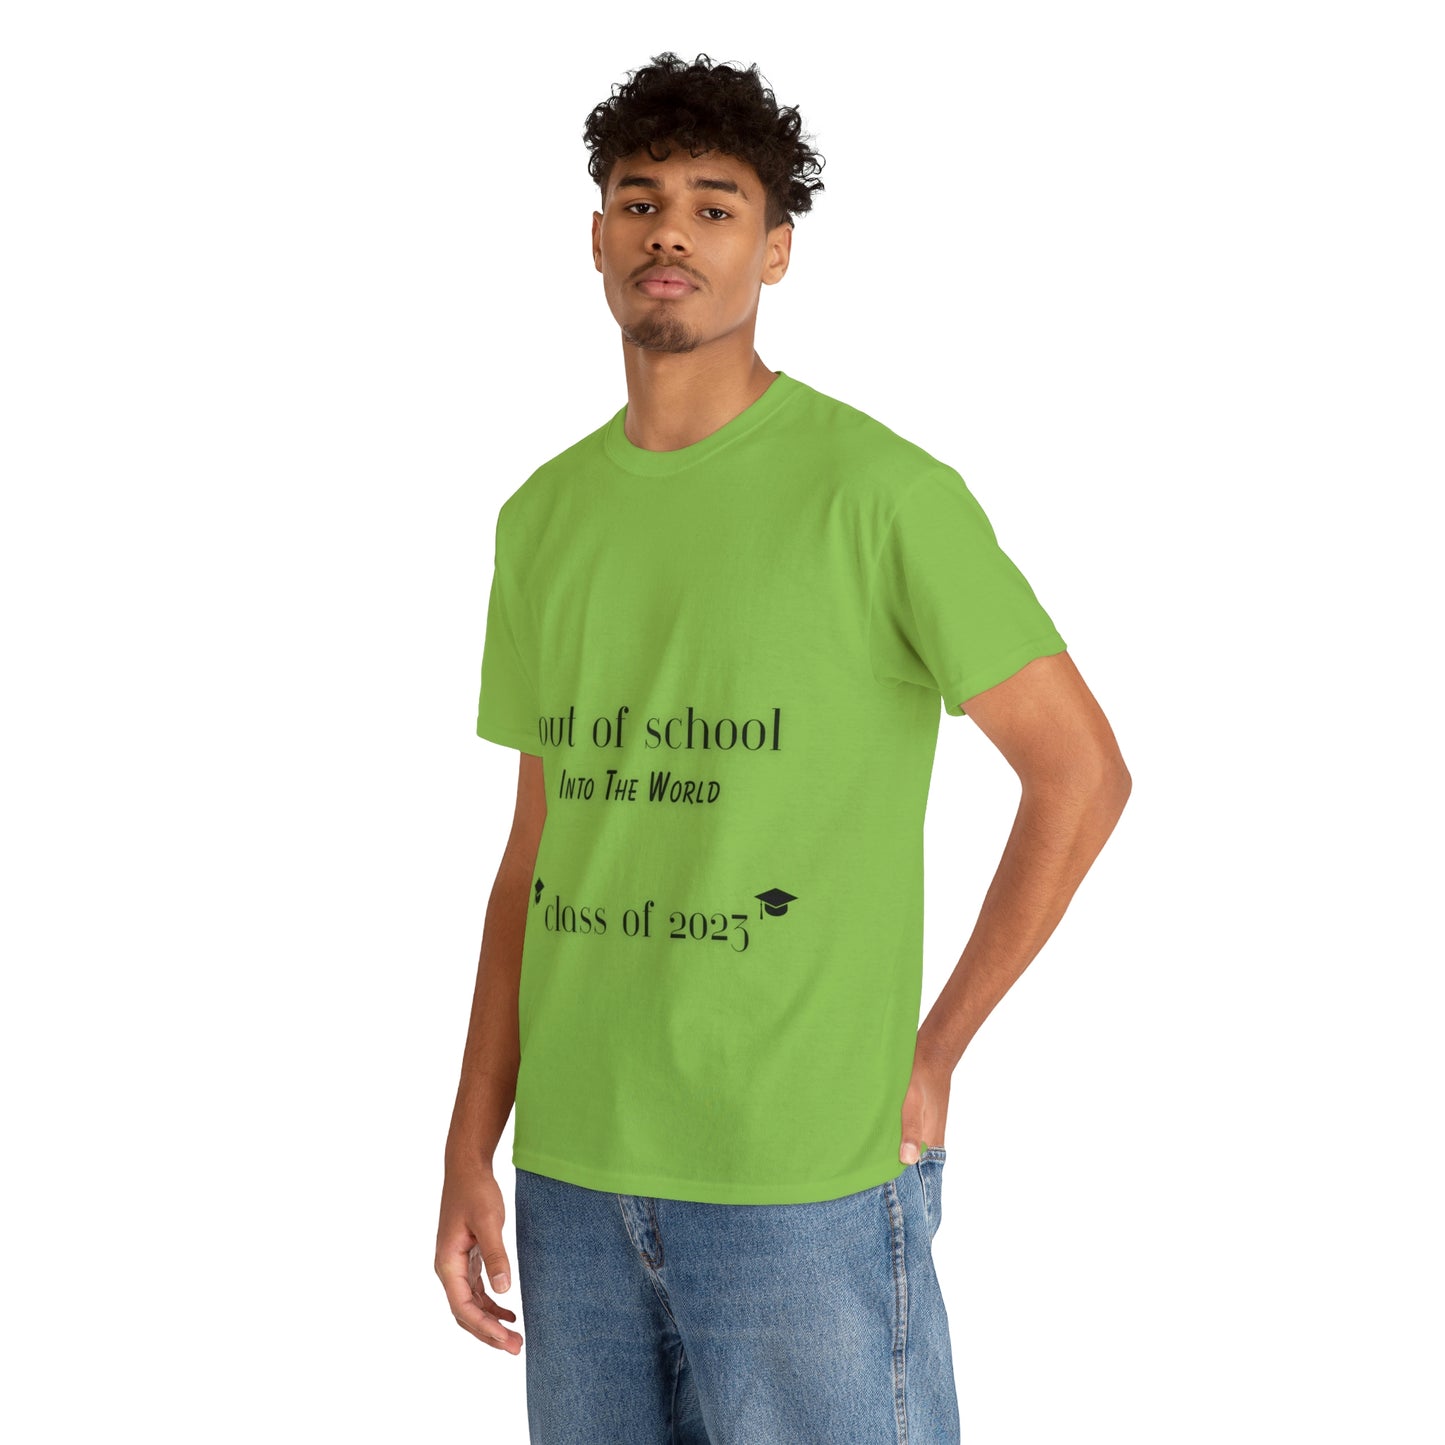 Out Of School Into The World T-shirt 2023 Graduation T-shirt